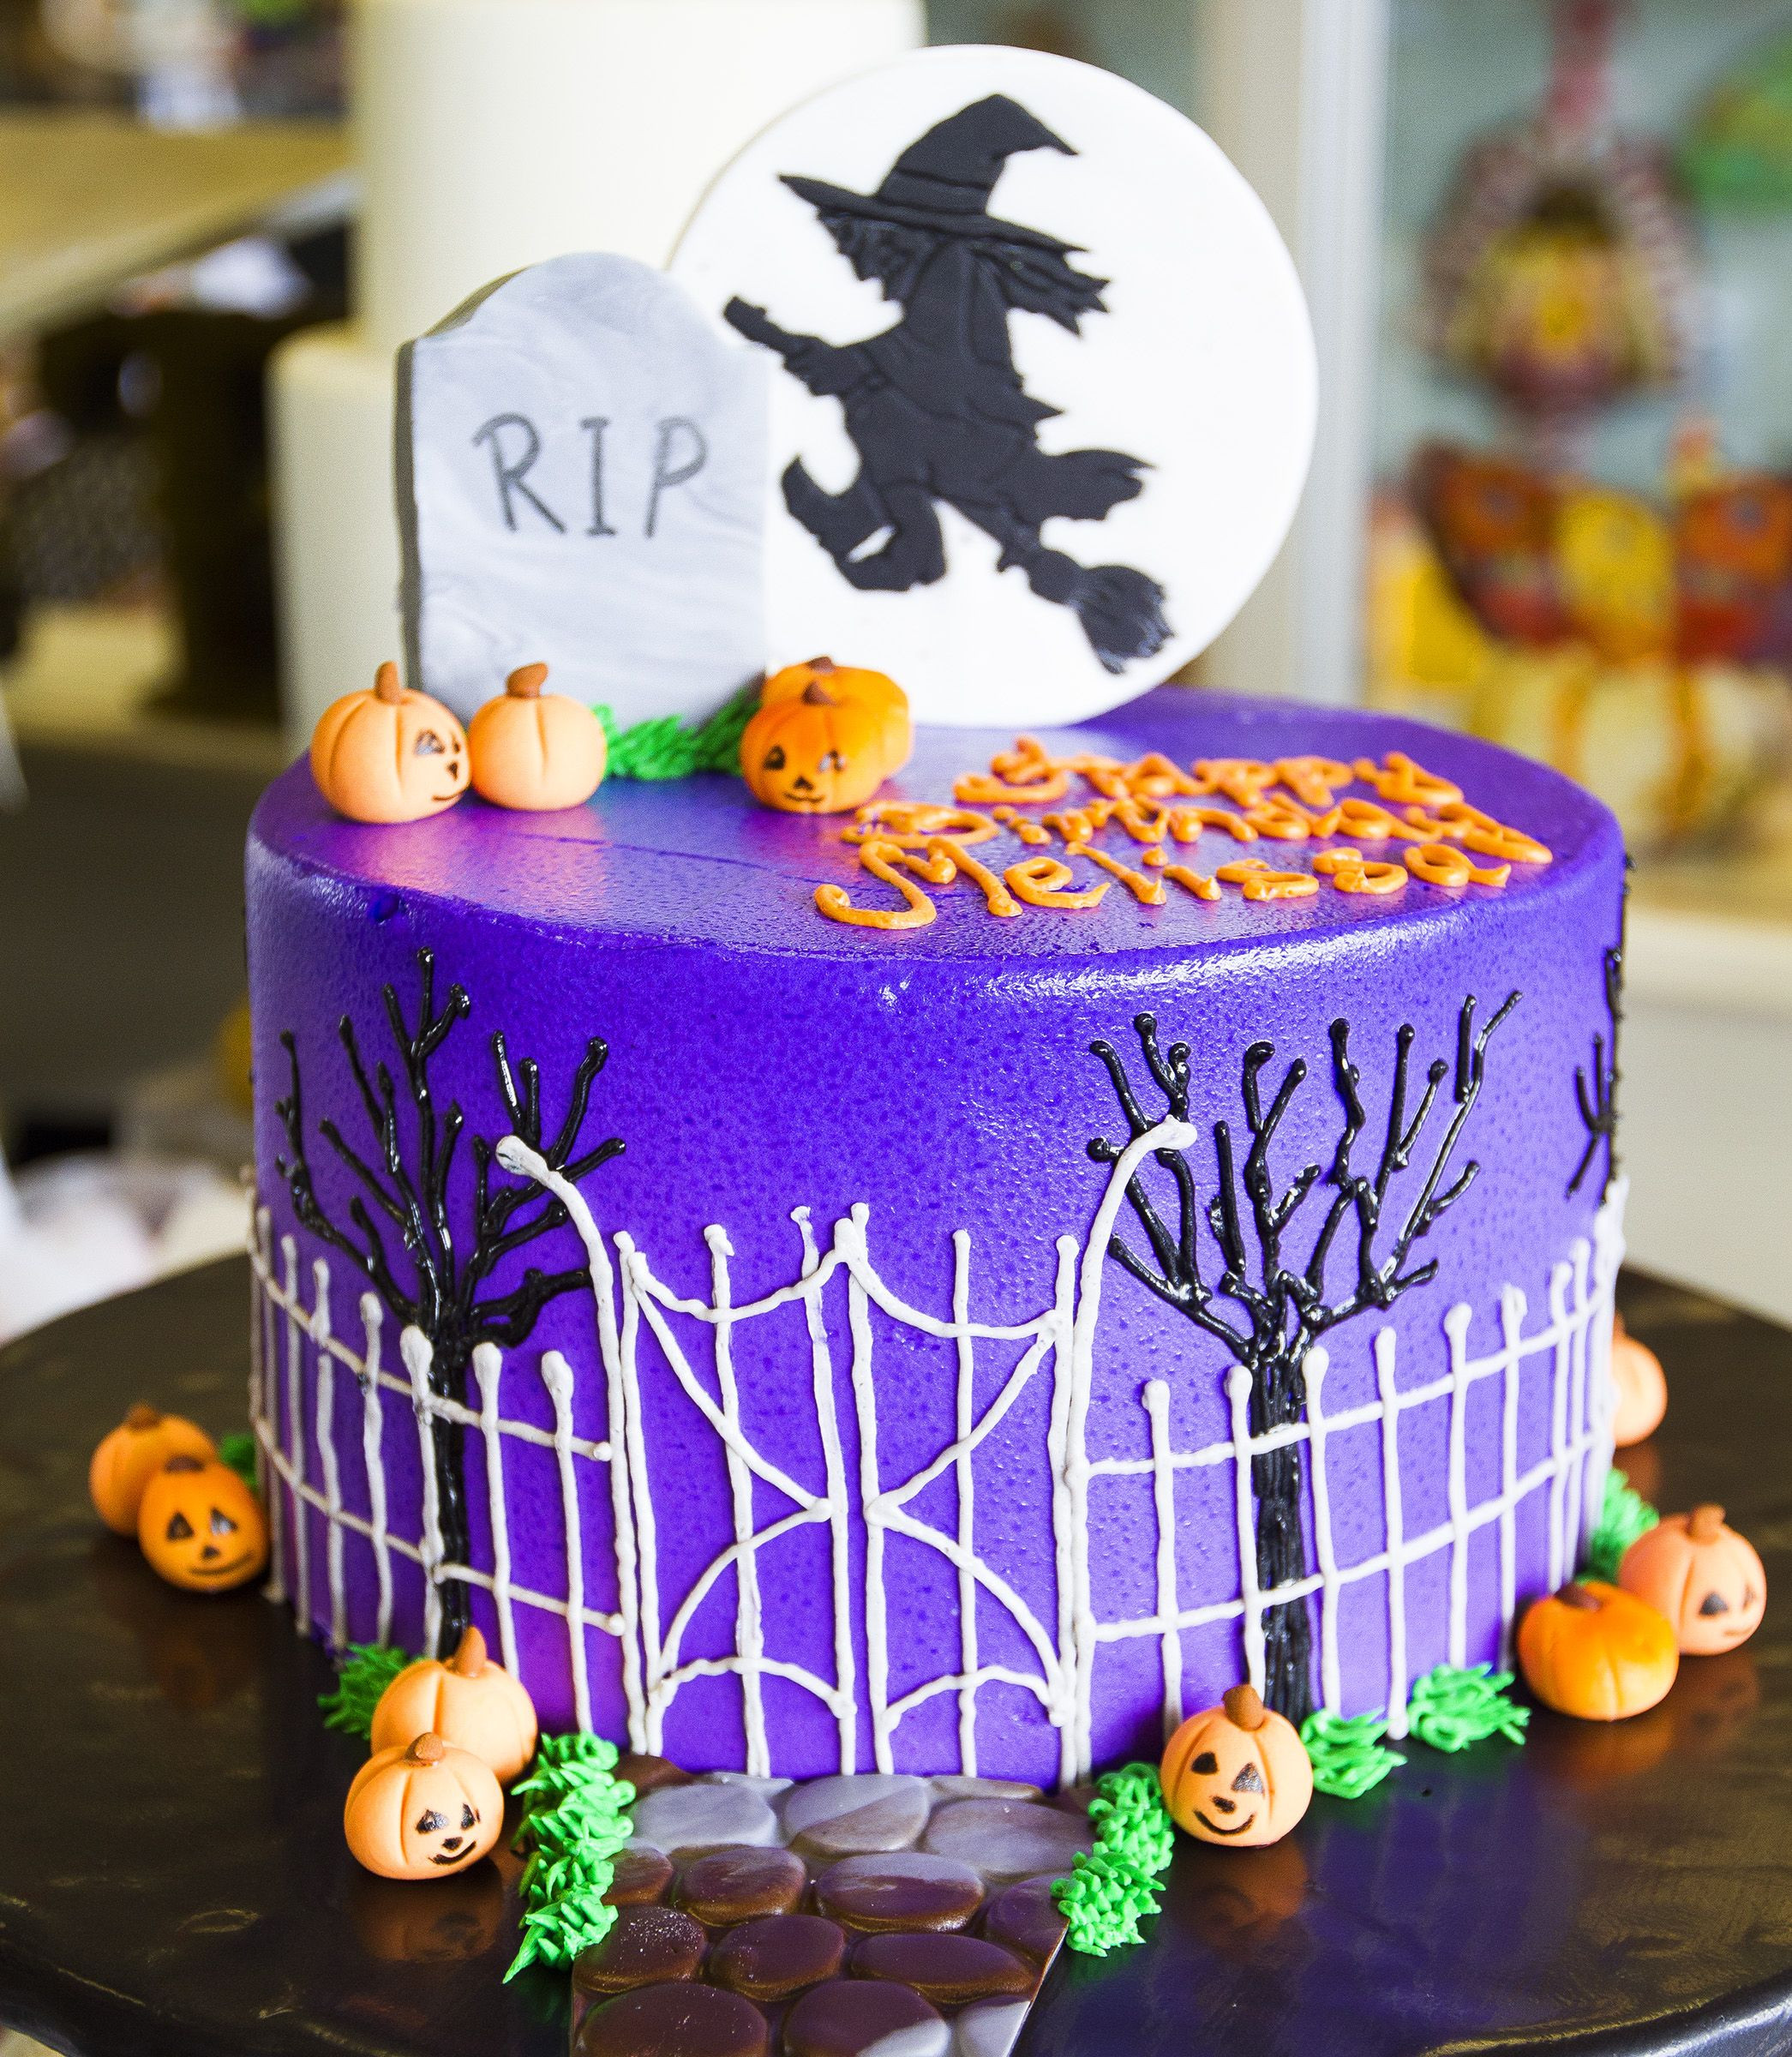 Halloween Cakes Pinterest
 A spooky graveyard and witch cake for a Halloween birthday